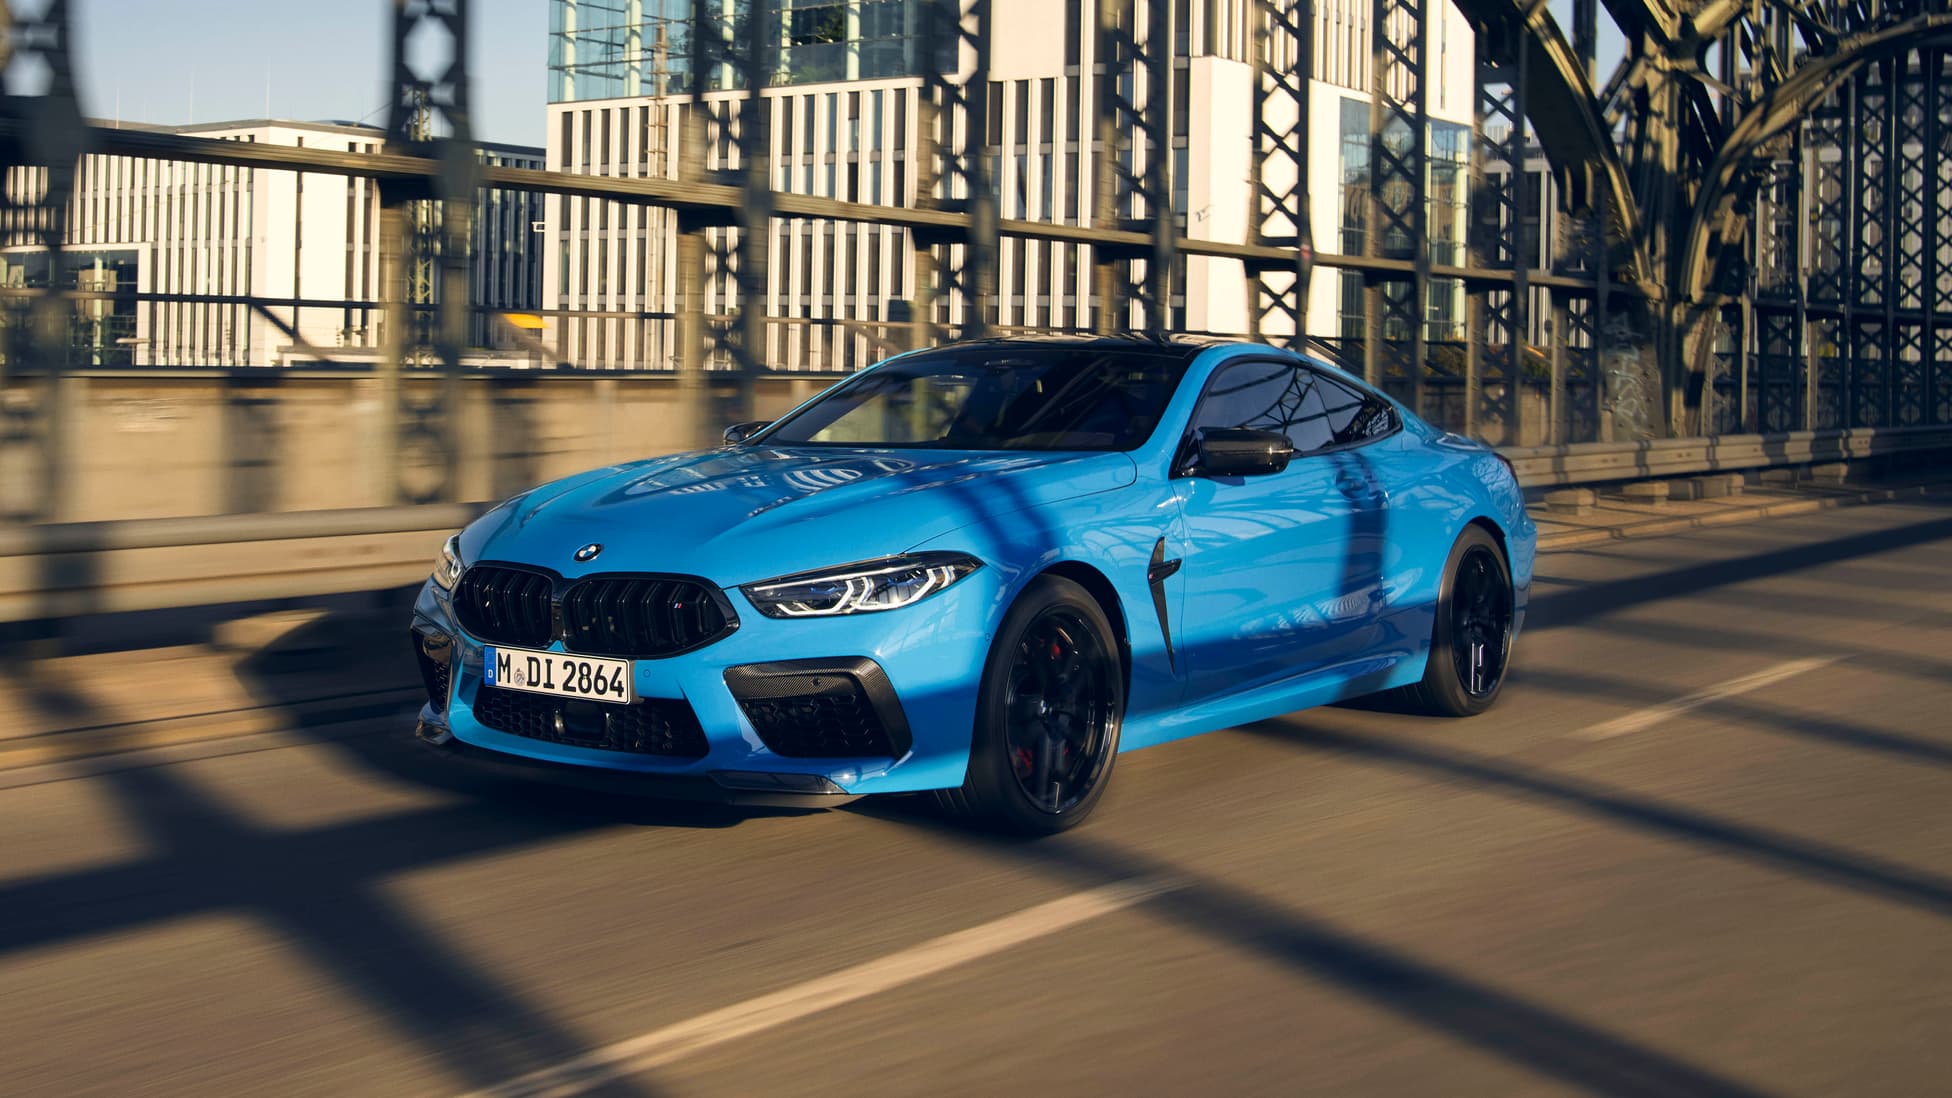 2022 BMW M8 Competition facelift, 2022 BMW M8 Competition updates, BMW M8 Competition facelift 2022, BMW M8 Competition updates 2022, BMW M8 Competition gran coupe updates, blue BMW M8